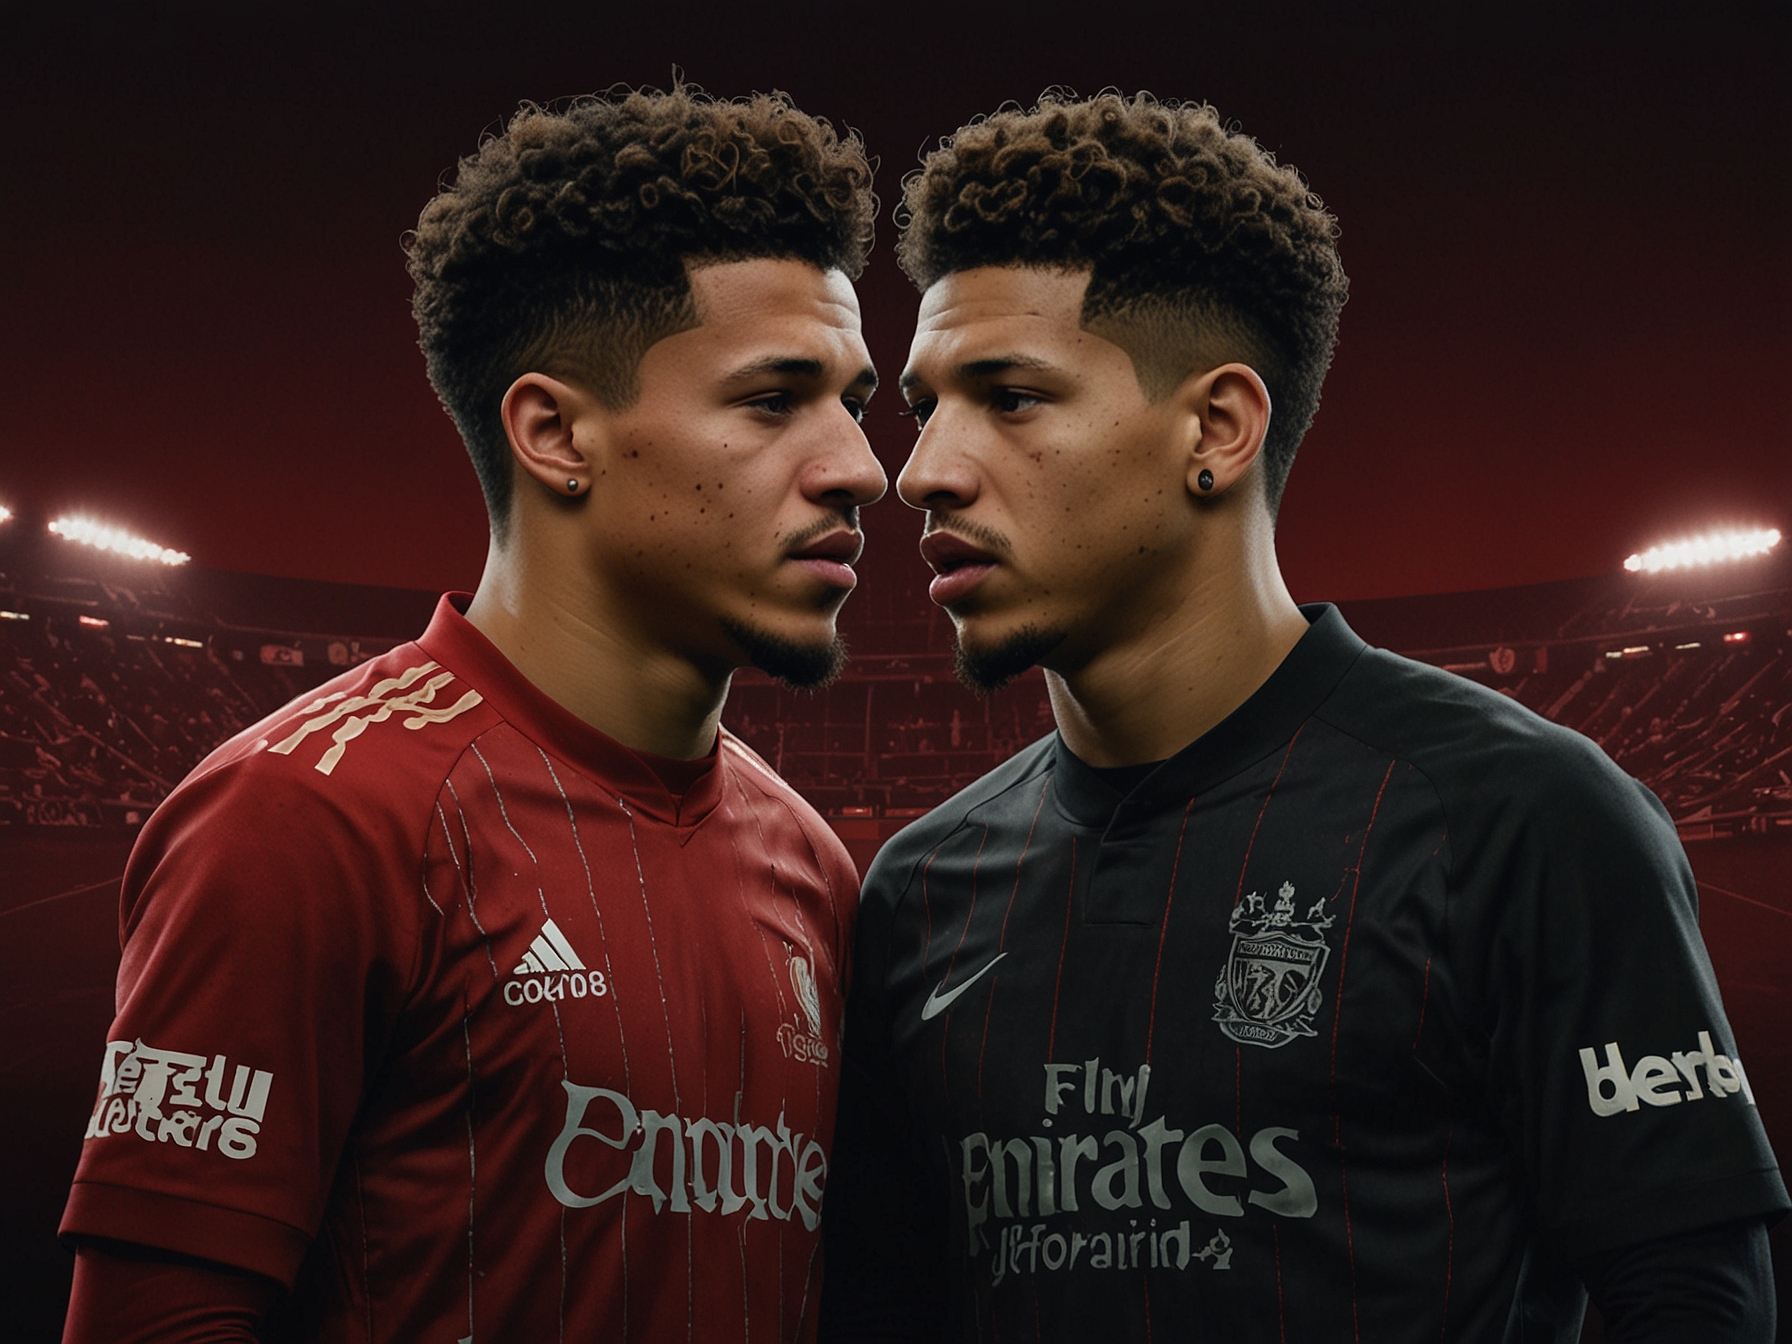 Depiction of Barcelona's dual transfer strategy with split visuals: Jadon Sancho and an enigmatic Liverpool player. The image emphasizes Barcelona's ambition to rejuvenate their squad by incorporating youthful talent and proven performers.